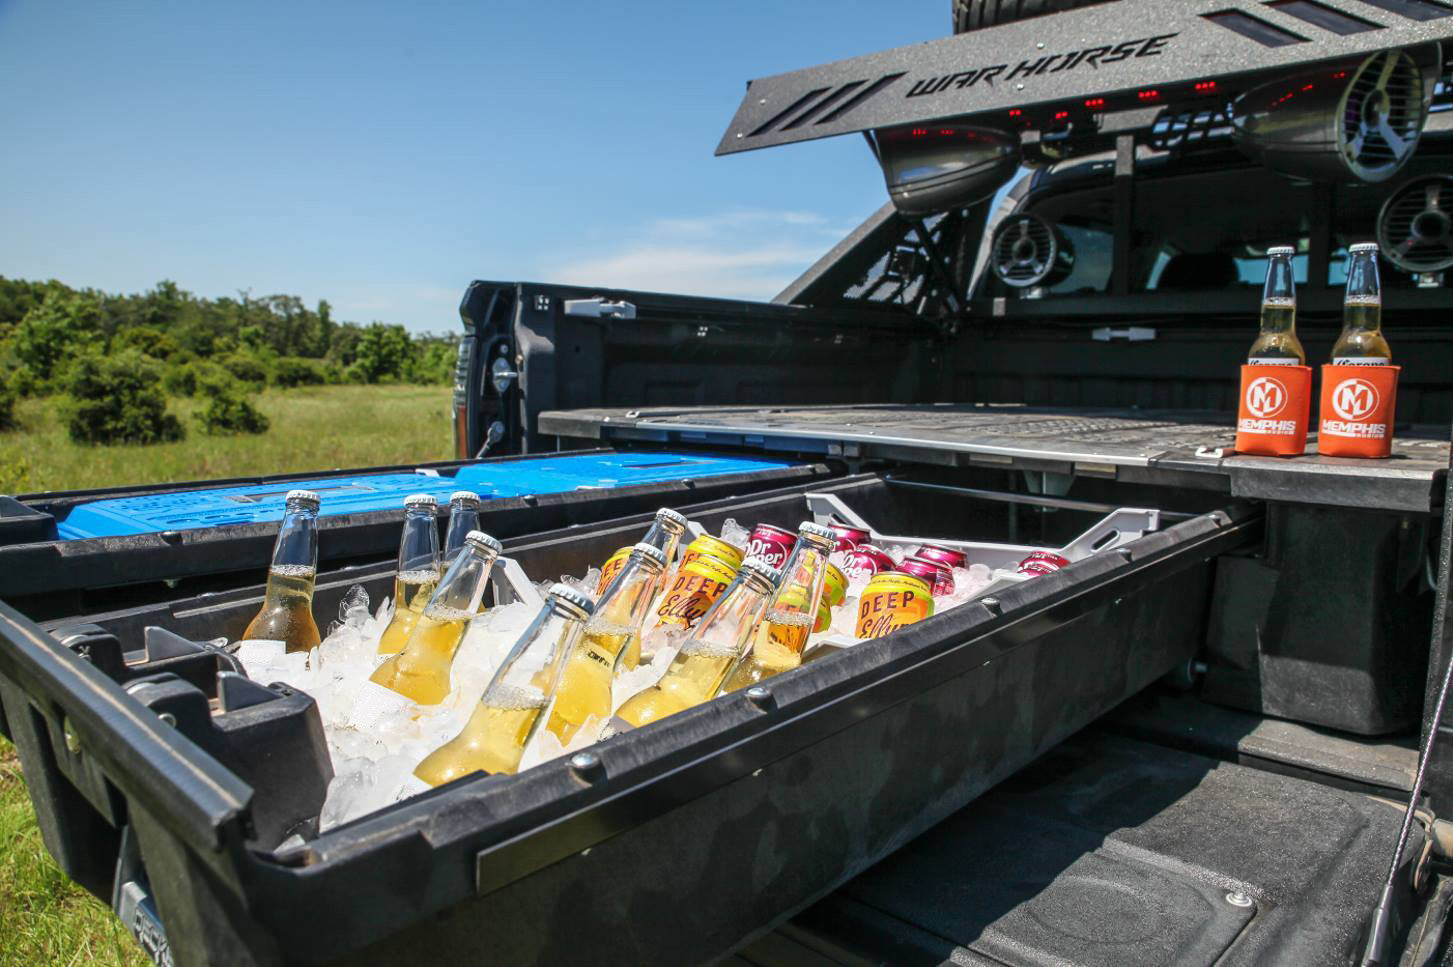 Drawer System being used as a cooler with ice and cold drinks in it